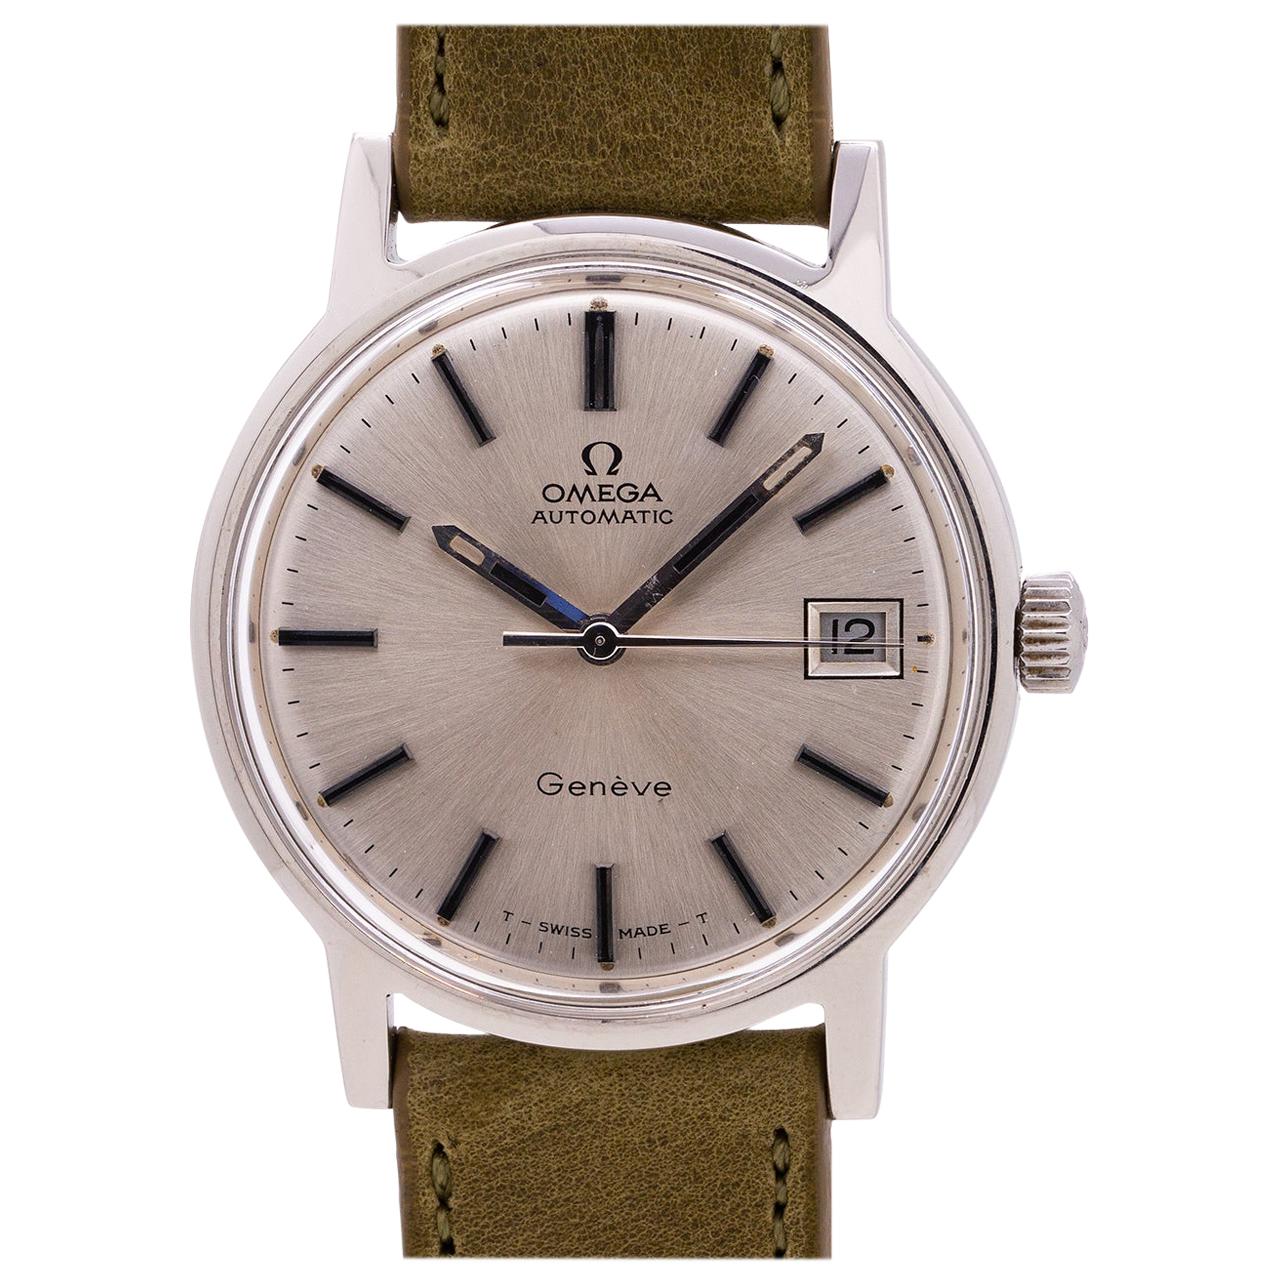 Omega Geneve Automatic Stainless Steel Ref 166.070, circa 1971 For Sale